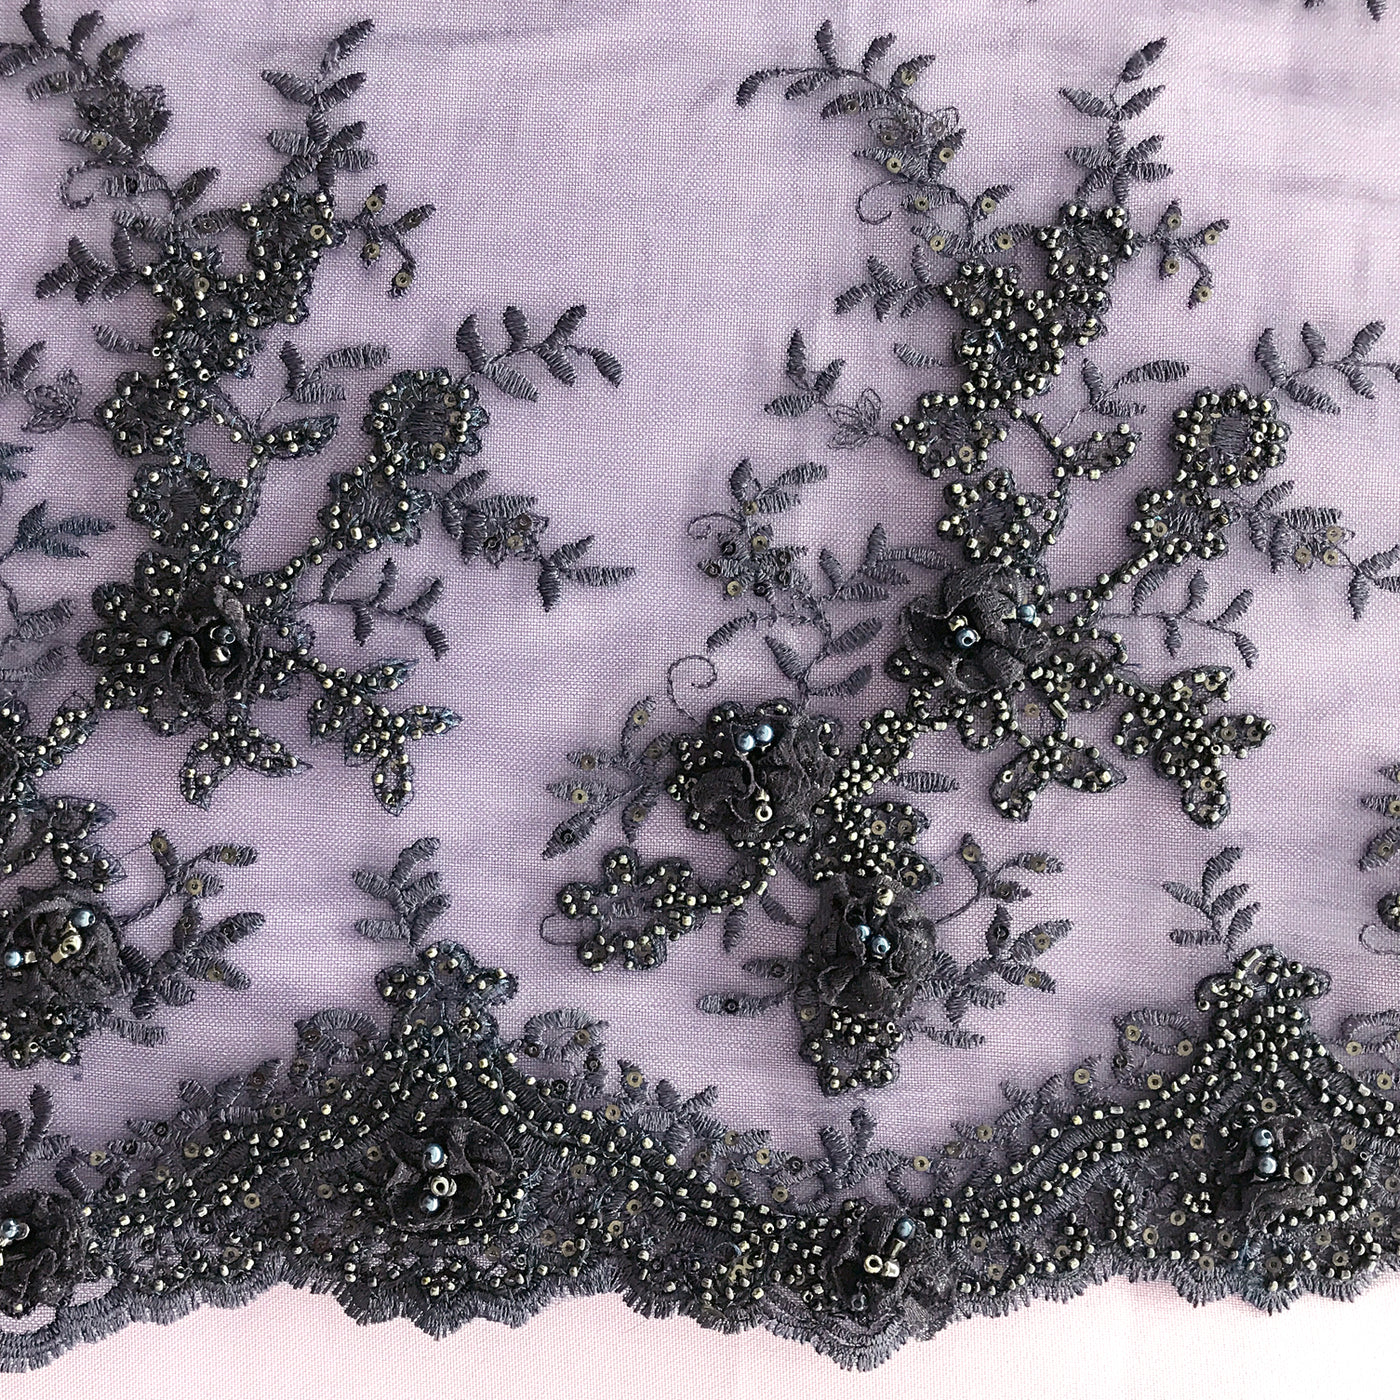 Embroidered & Beaded 3D Floral Lace Trimming on Net Mesh Fabric.  Sold by the yard  Lace Usa